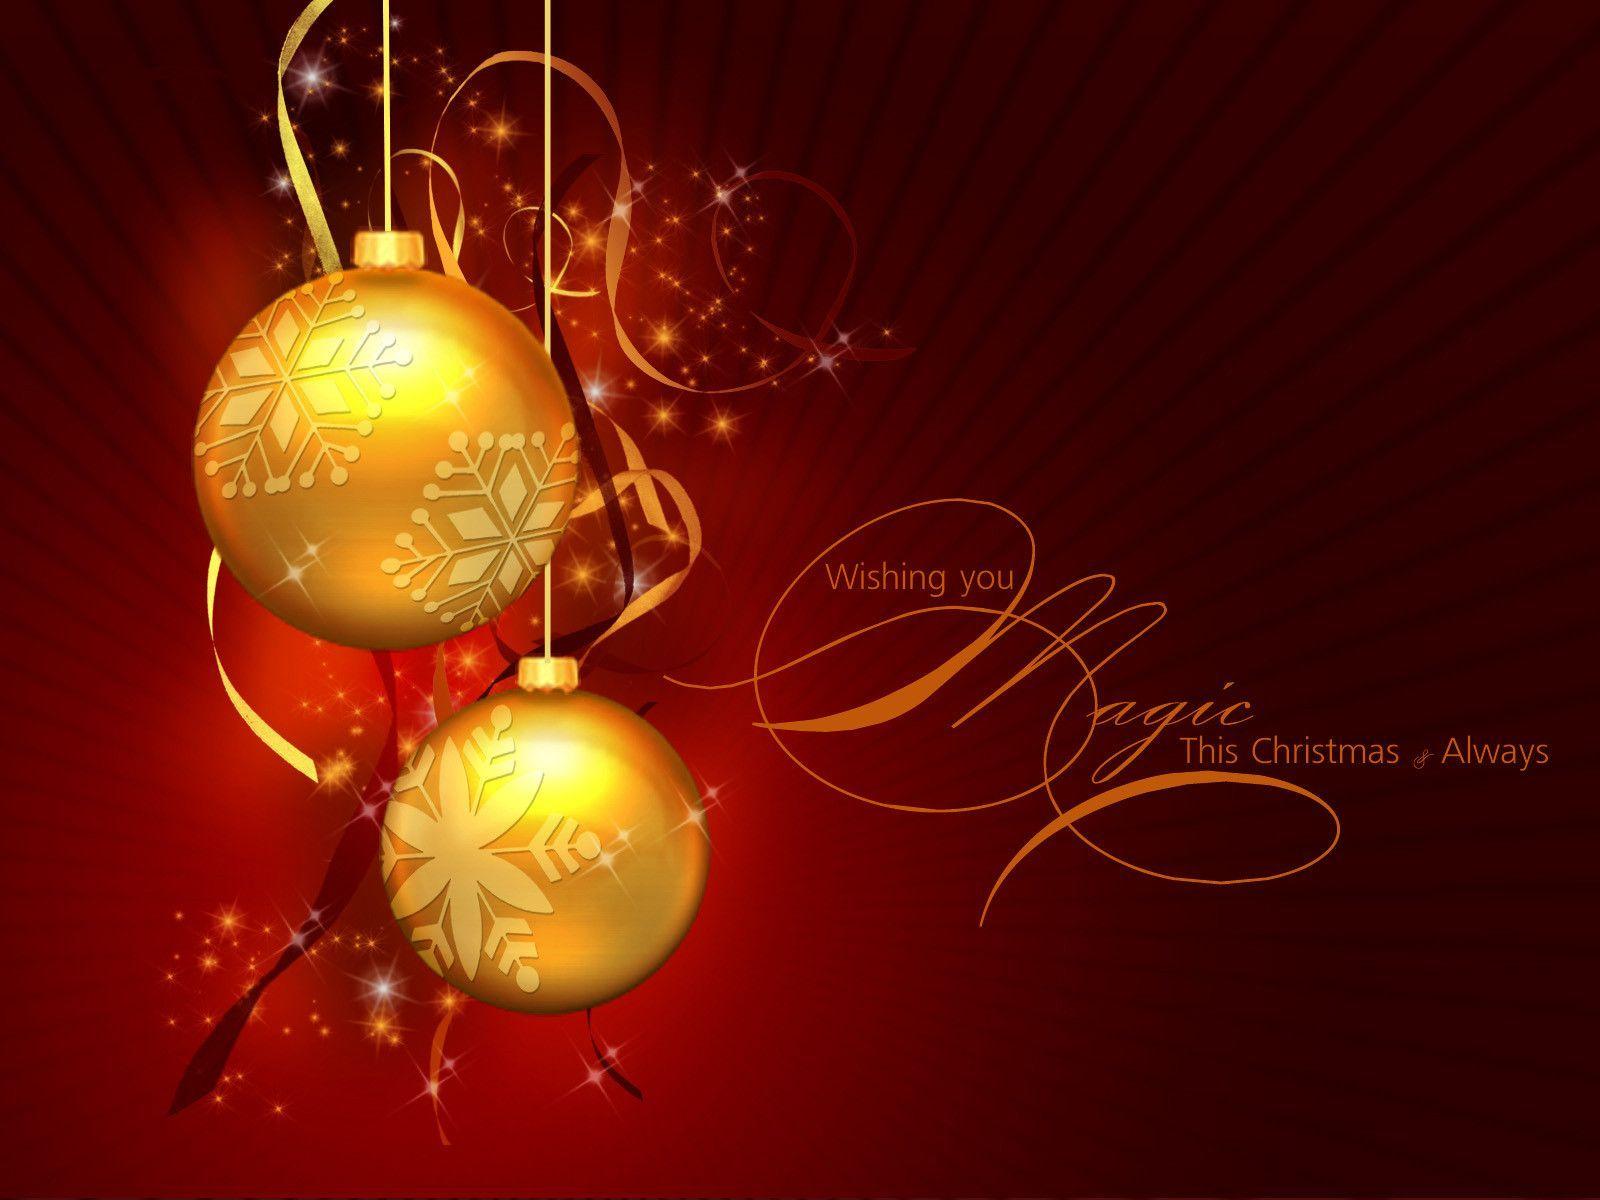 Merry Christmas Wallpapers Free - Wallpaper Cave